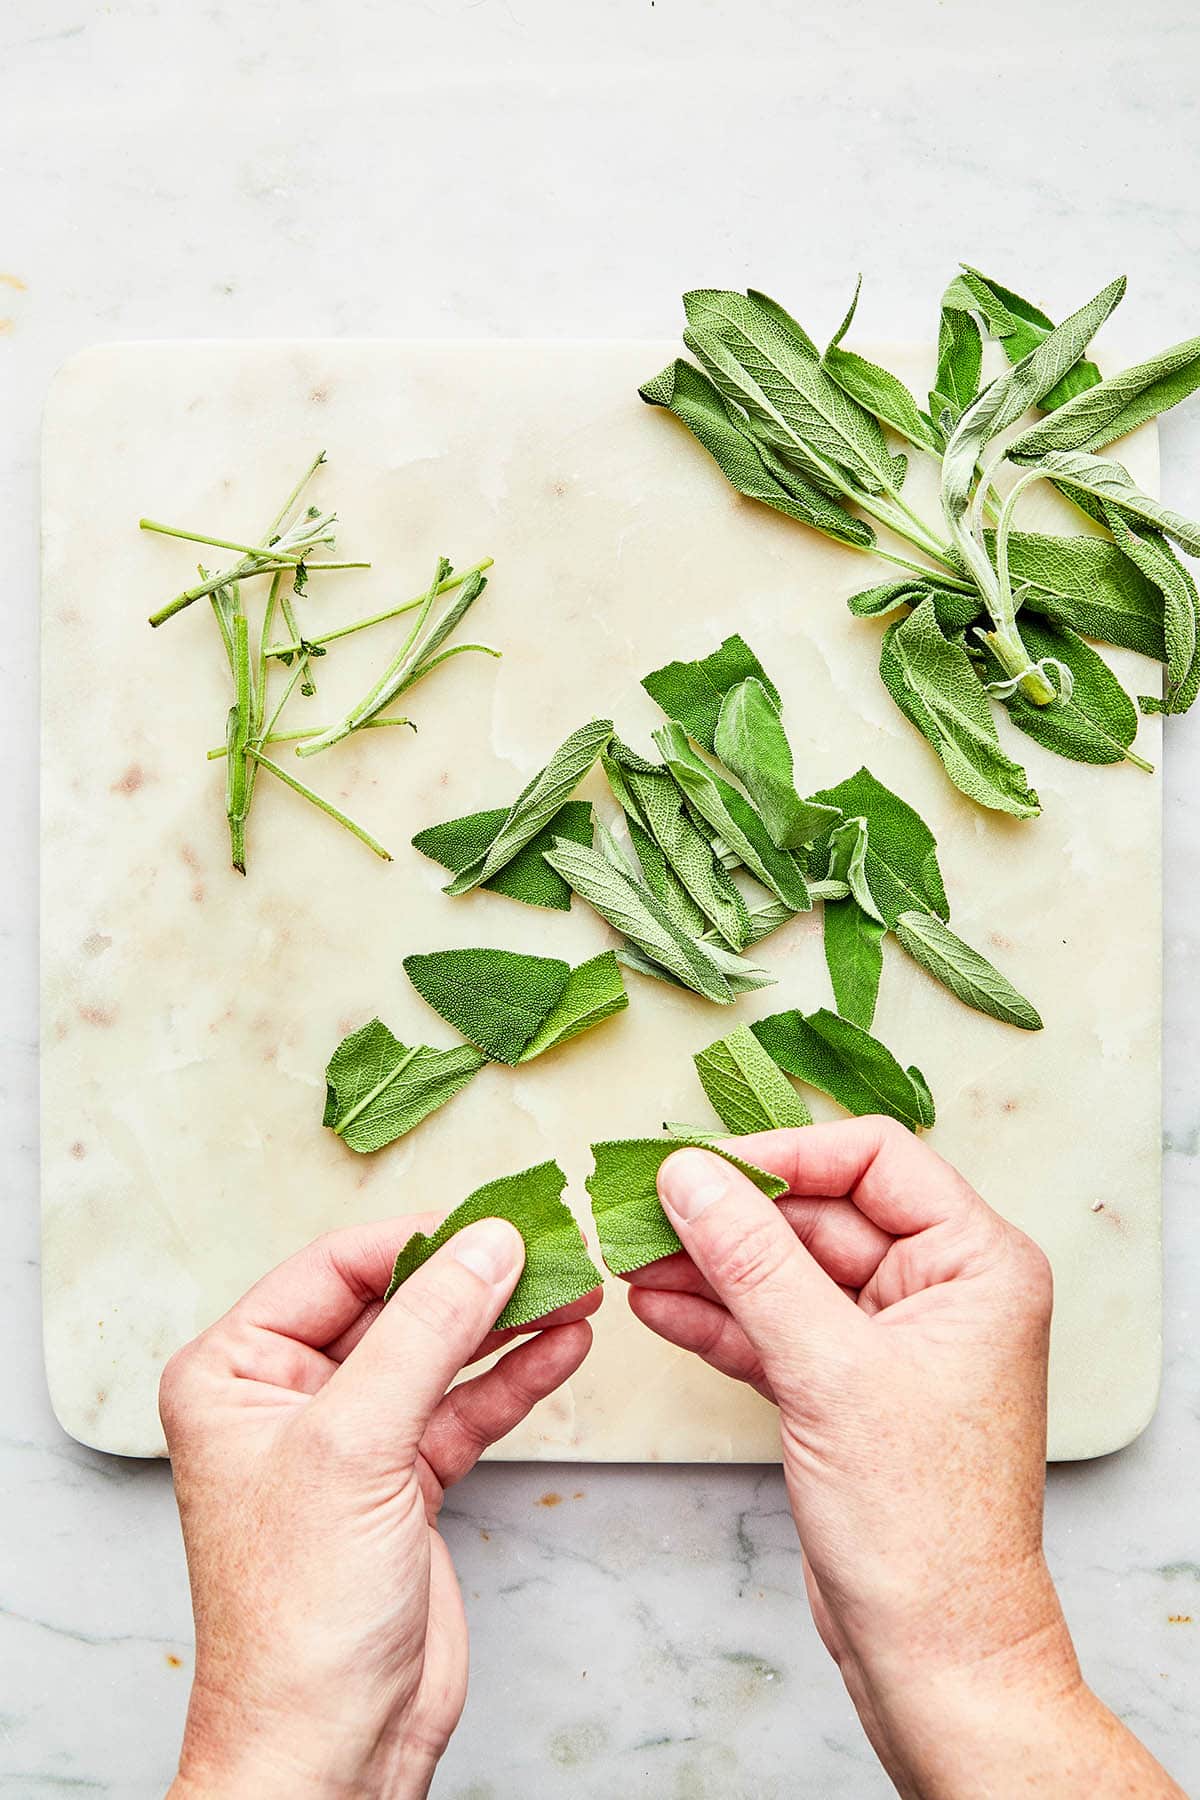 Hands tearing a large sage leaf in half with more fresh sage on the marble cutting board below.